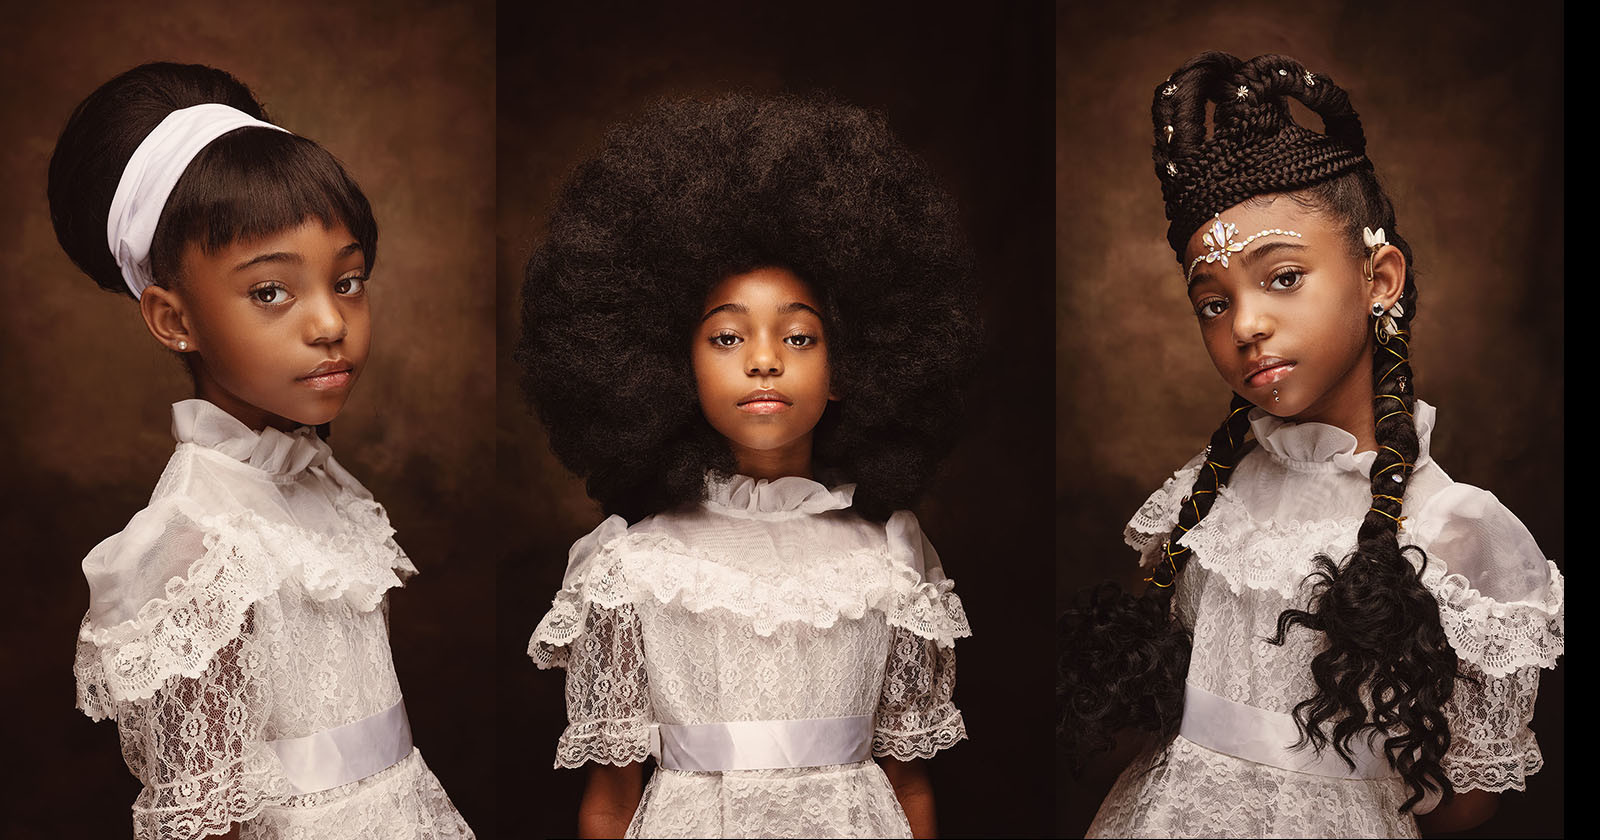 These Portraits Celebrate the History of Black Hair Styles